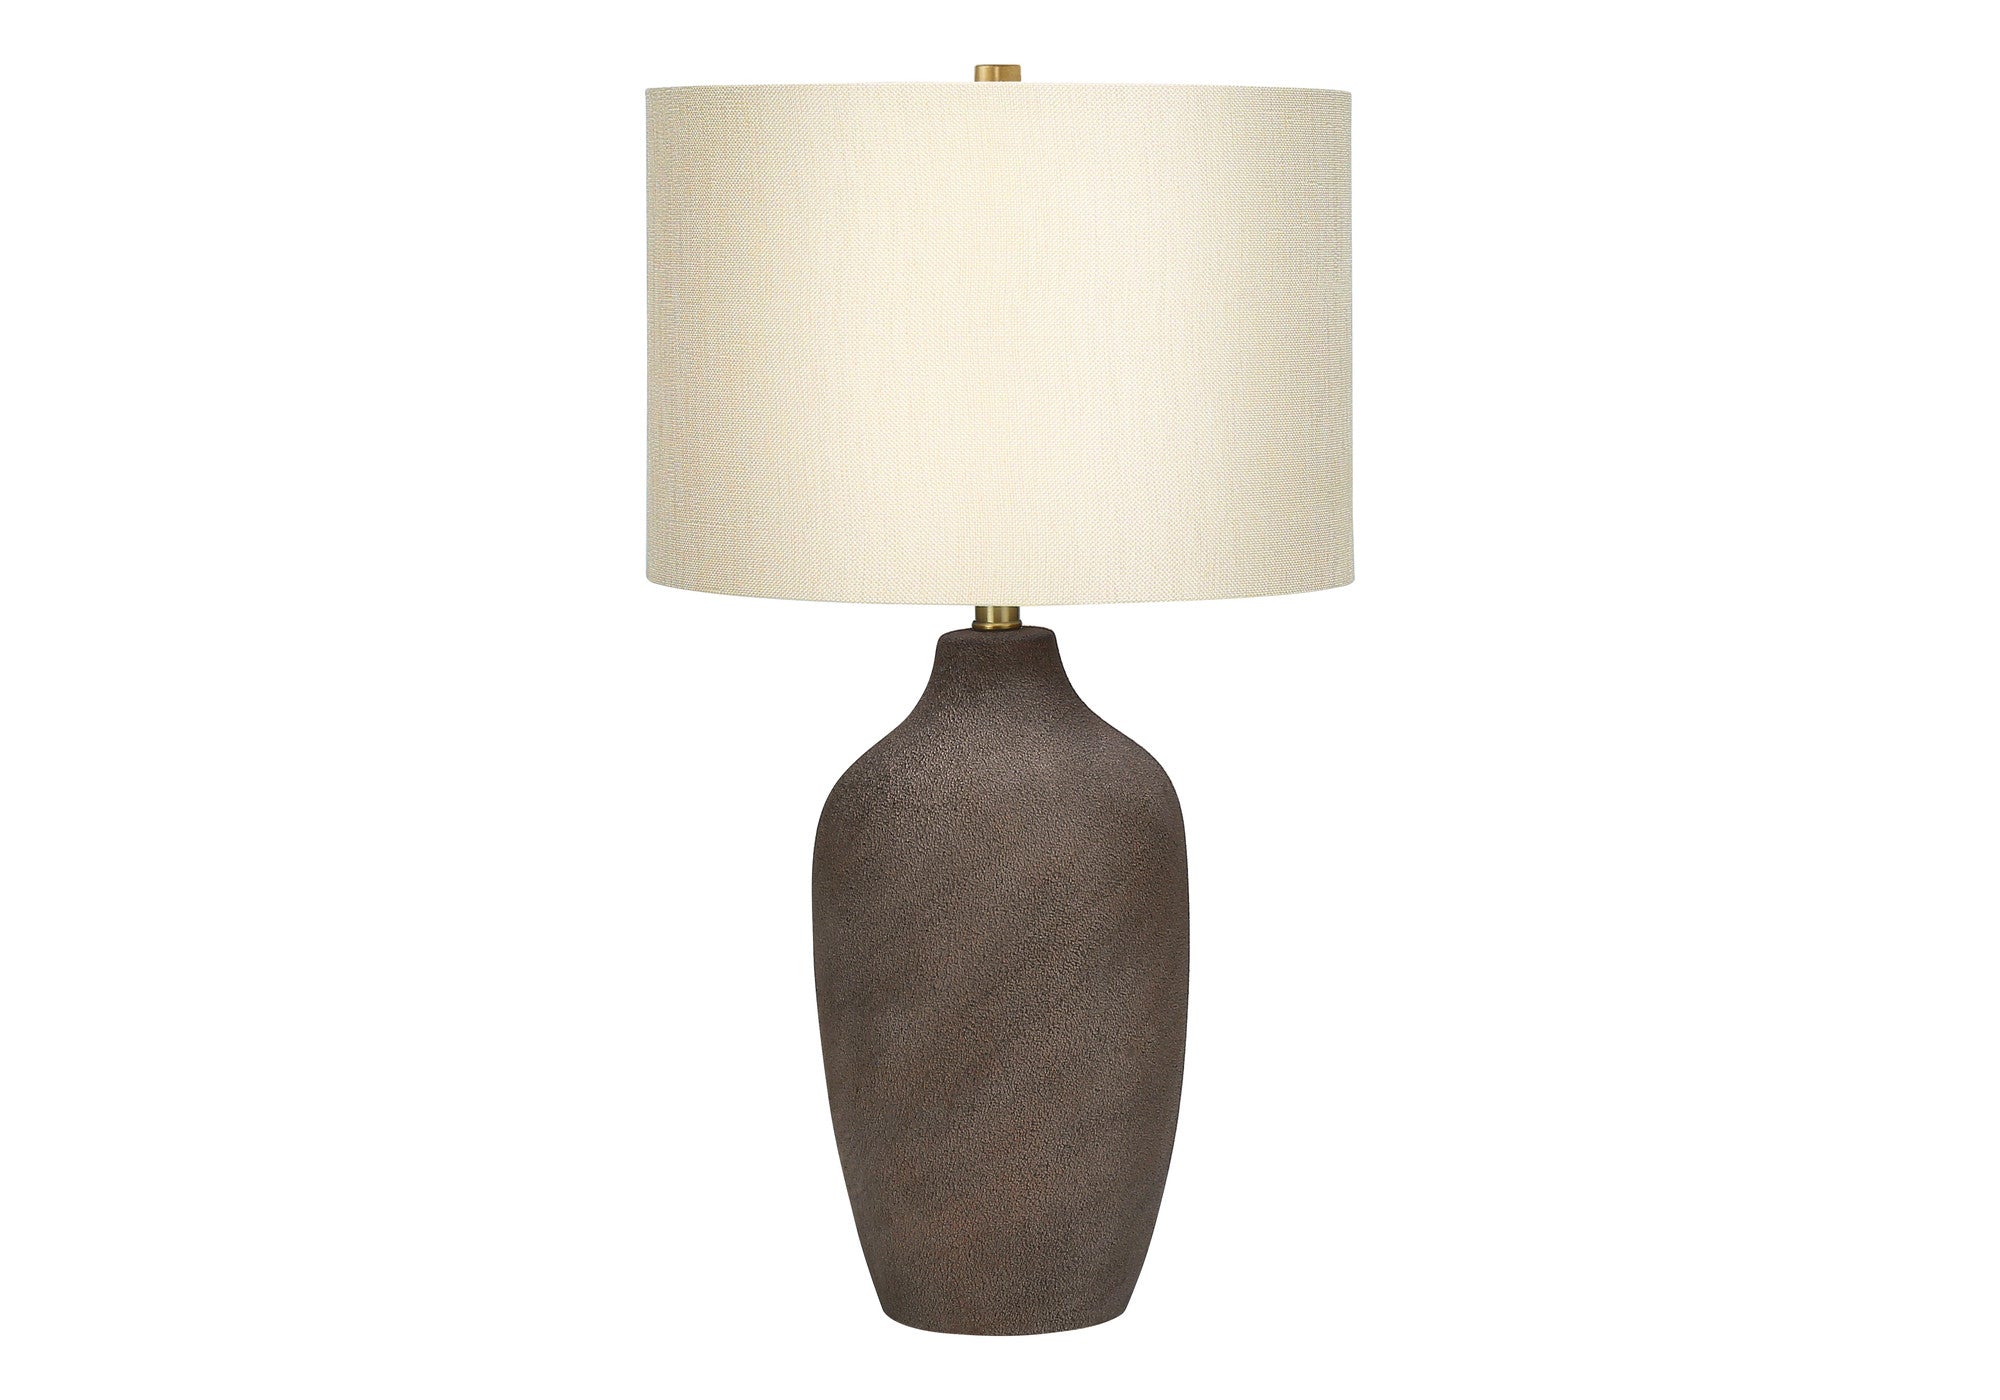 27" Gray Ceramic Urn Table Lamp With Beige Drum Shade